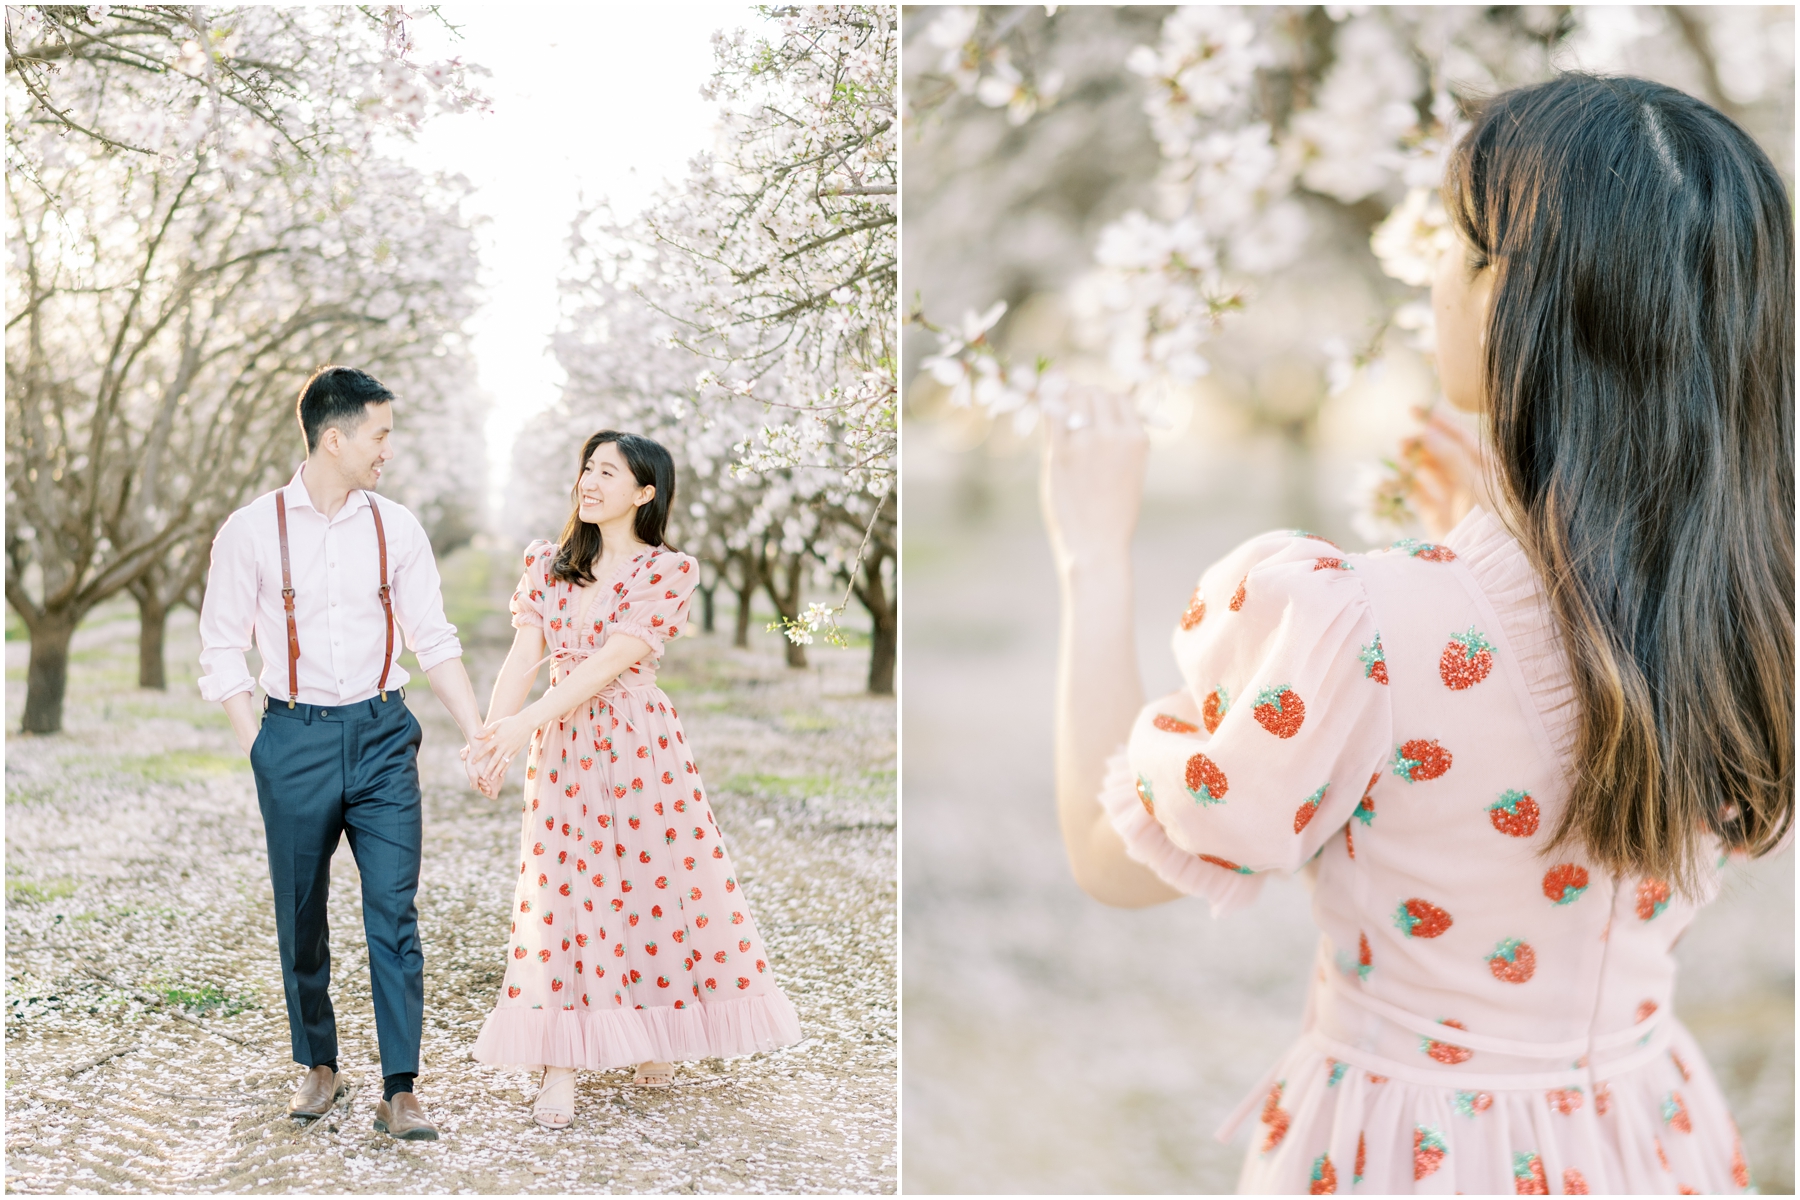 dreamy almond orchard engagement photos with petals with california photographer, sakura cherry blossom japan inspired engagement photos